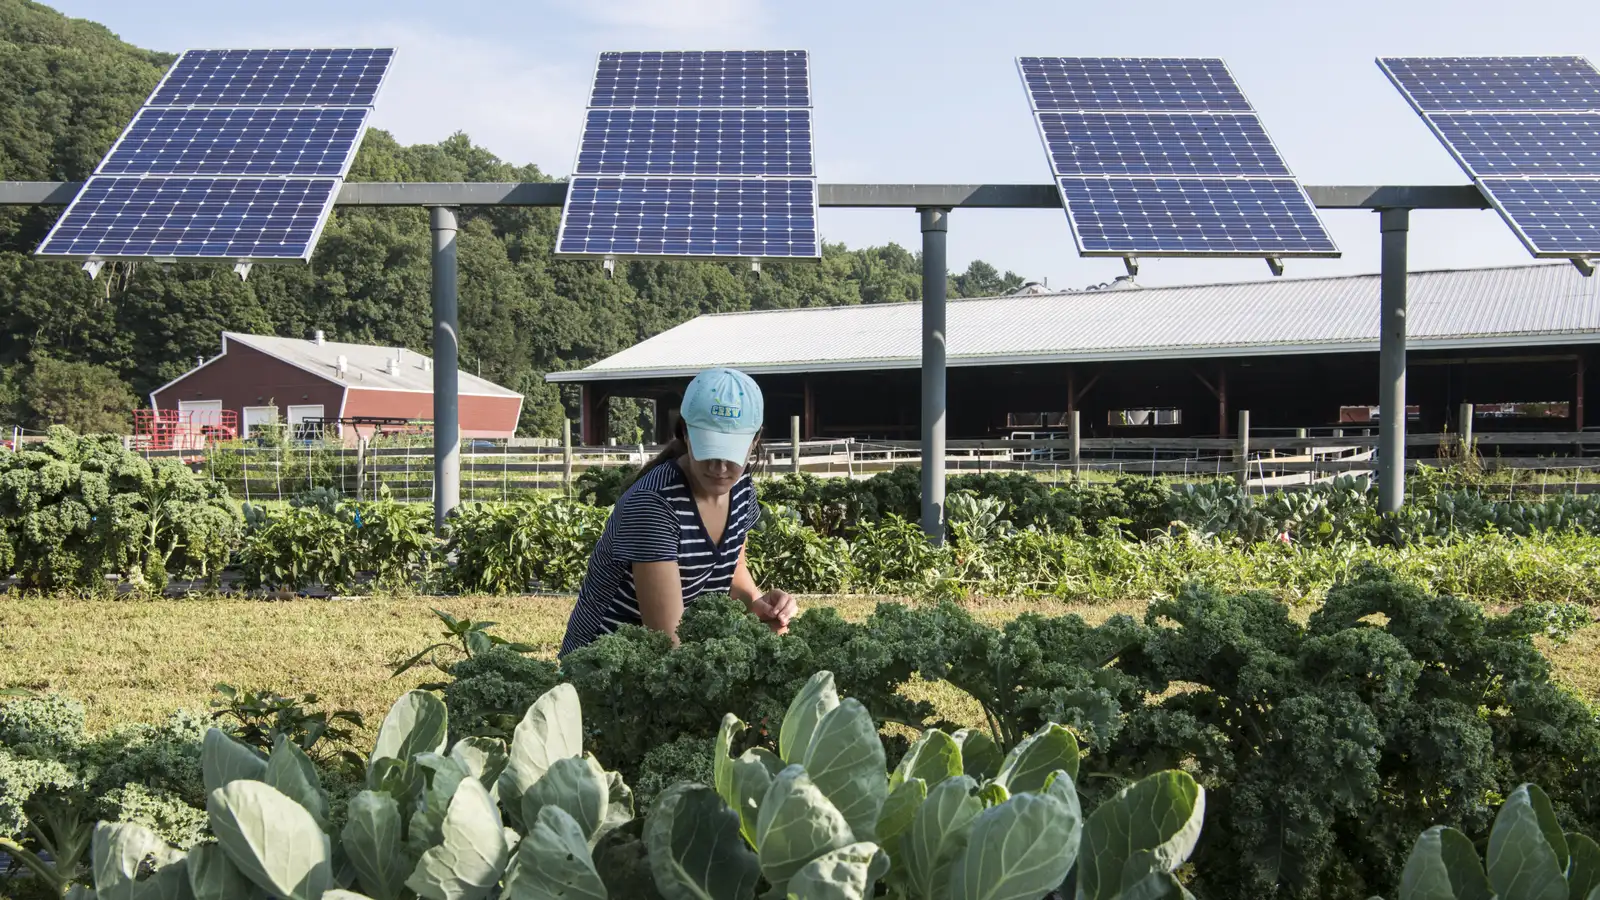 The Intersection of Solar Energy and Urban Farming